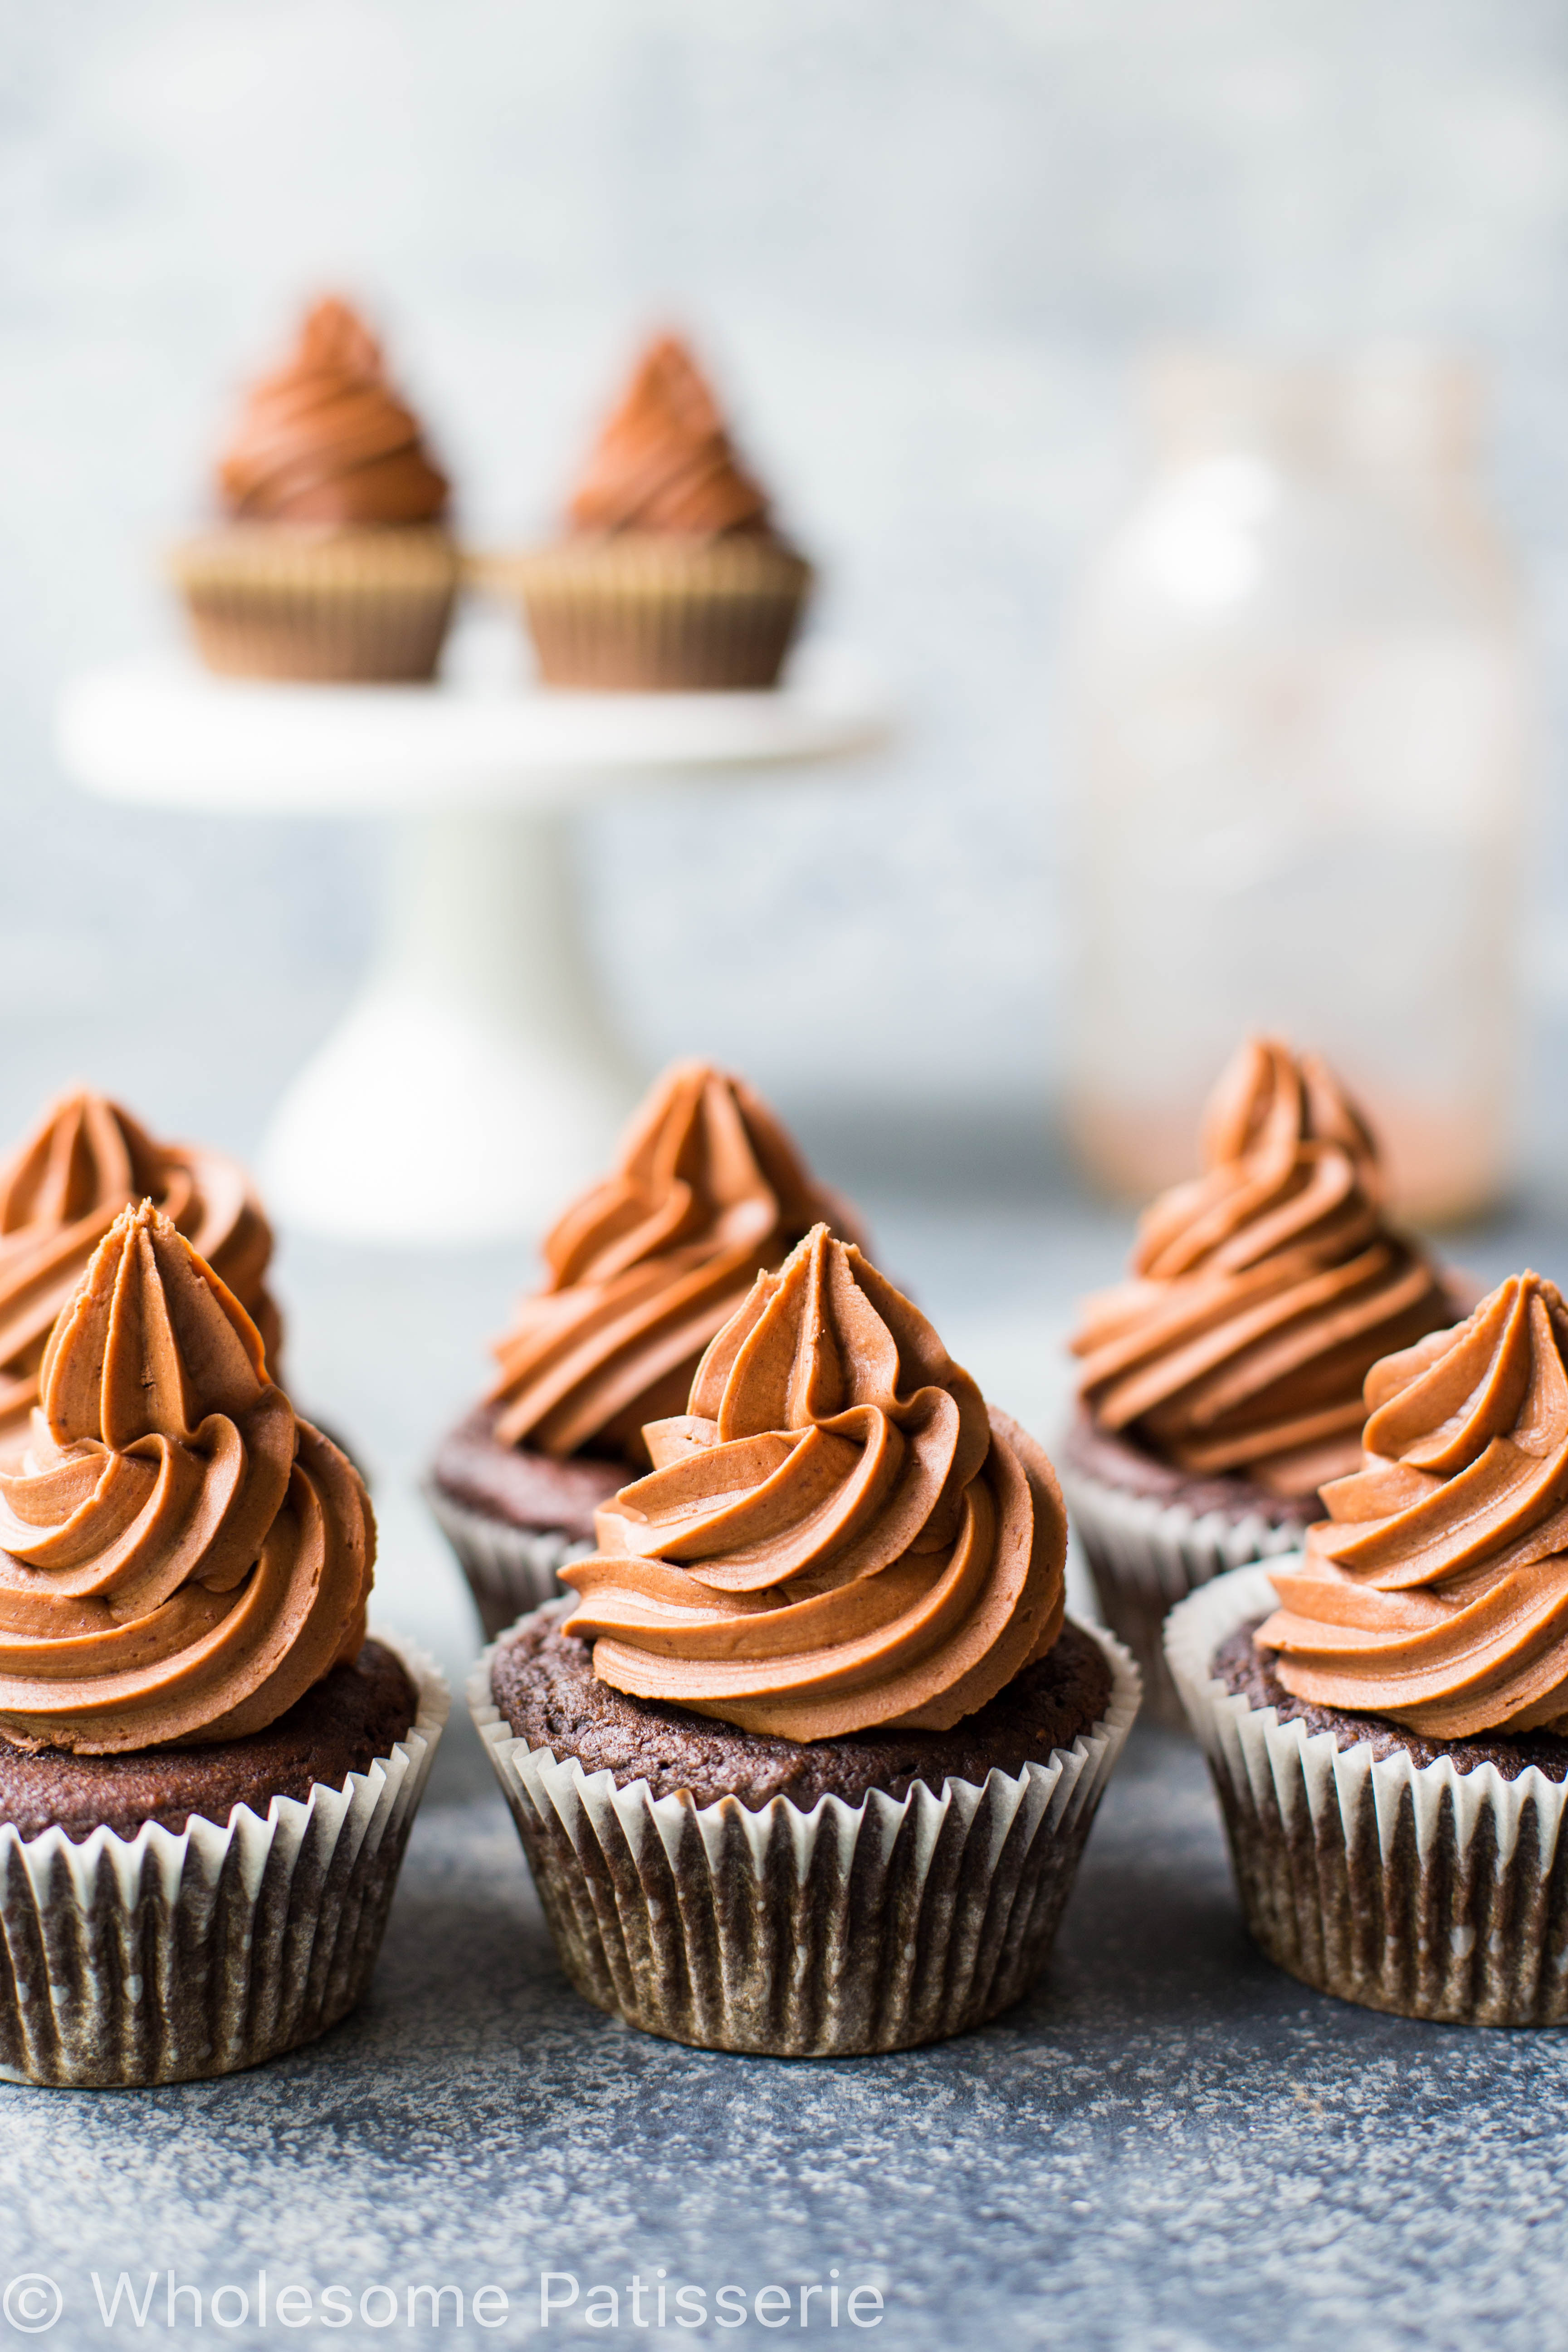 mint-chocolate-cupcakes-gluten-free-vegetarian-mint-baking-delicious-easy